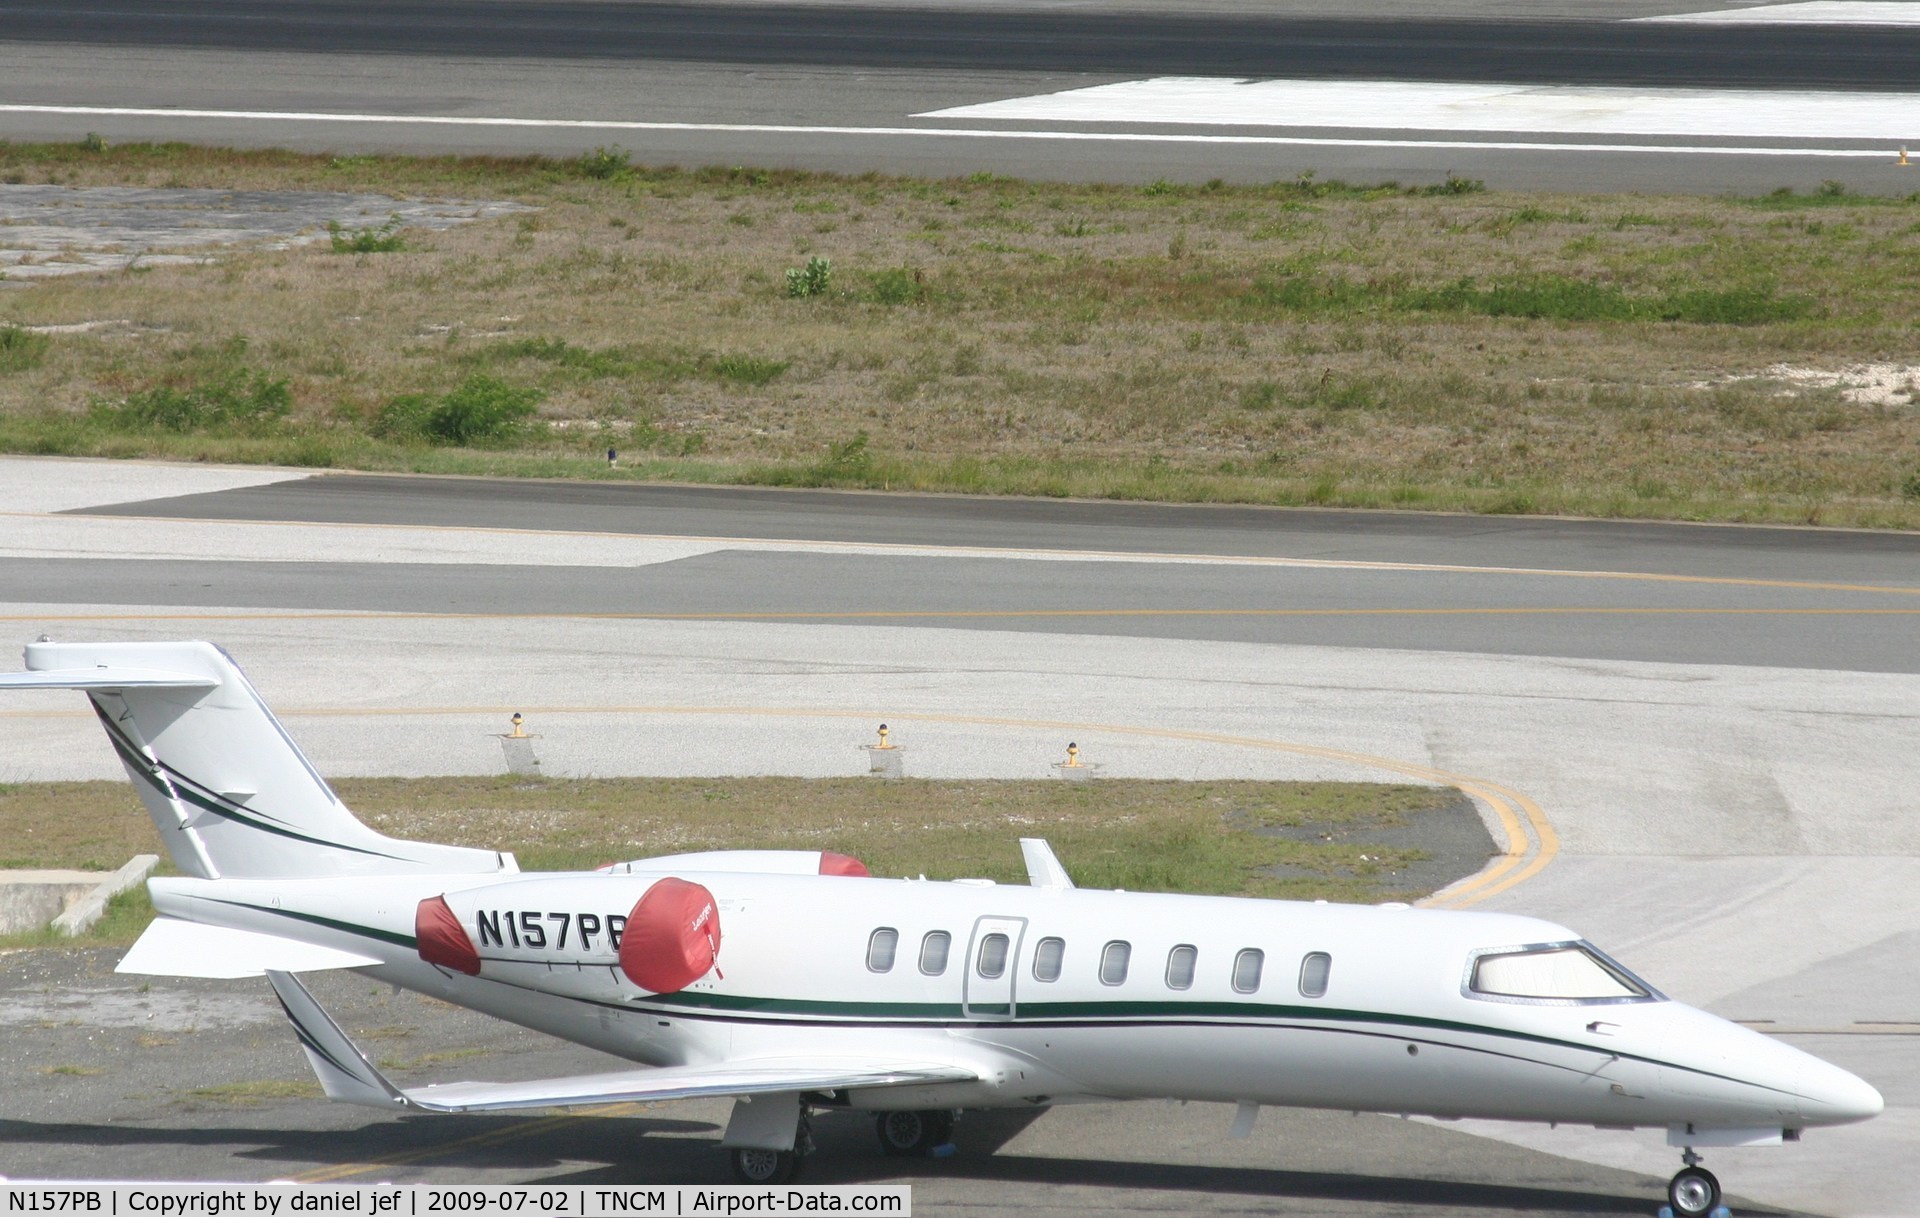 N157PB, 1998 Learjet 45 C/N 030, park at the cargo ramp